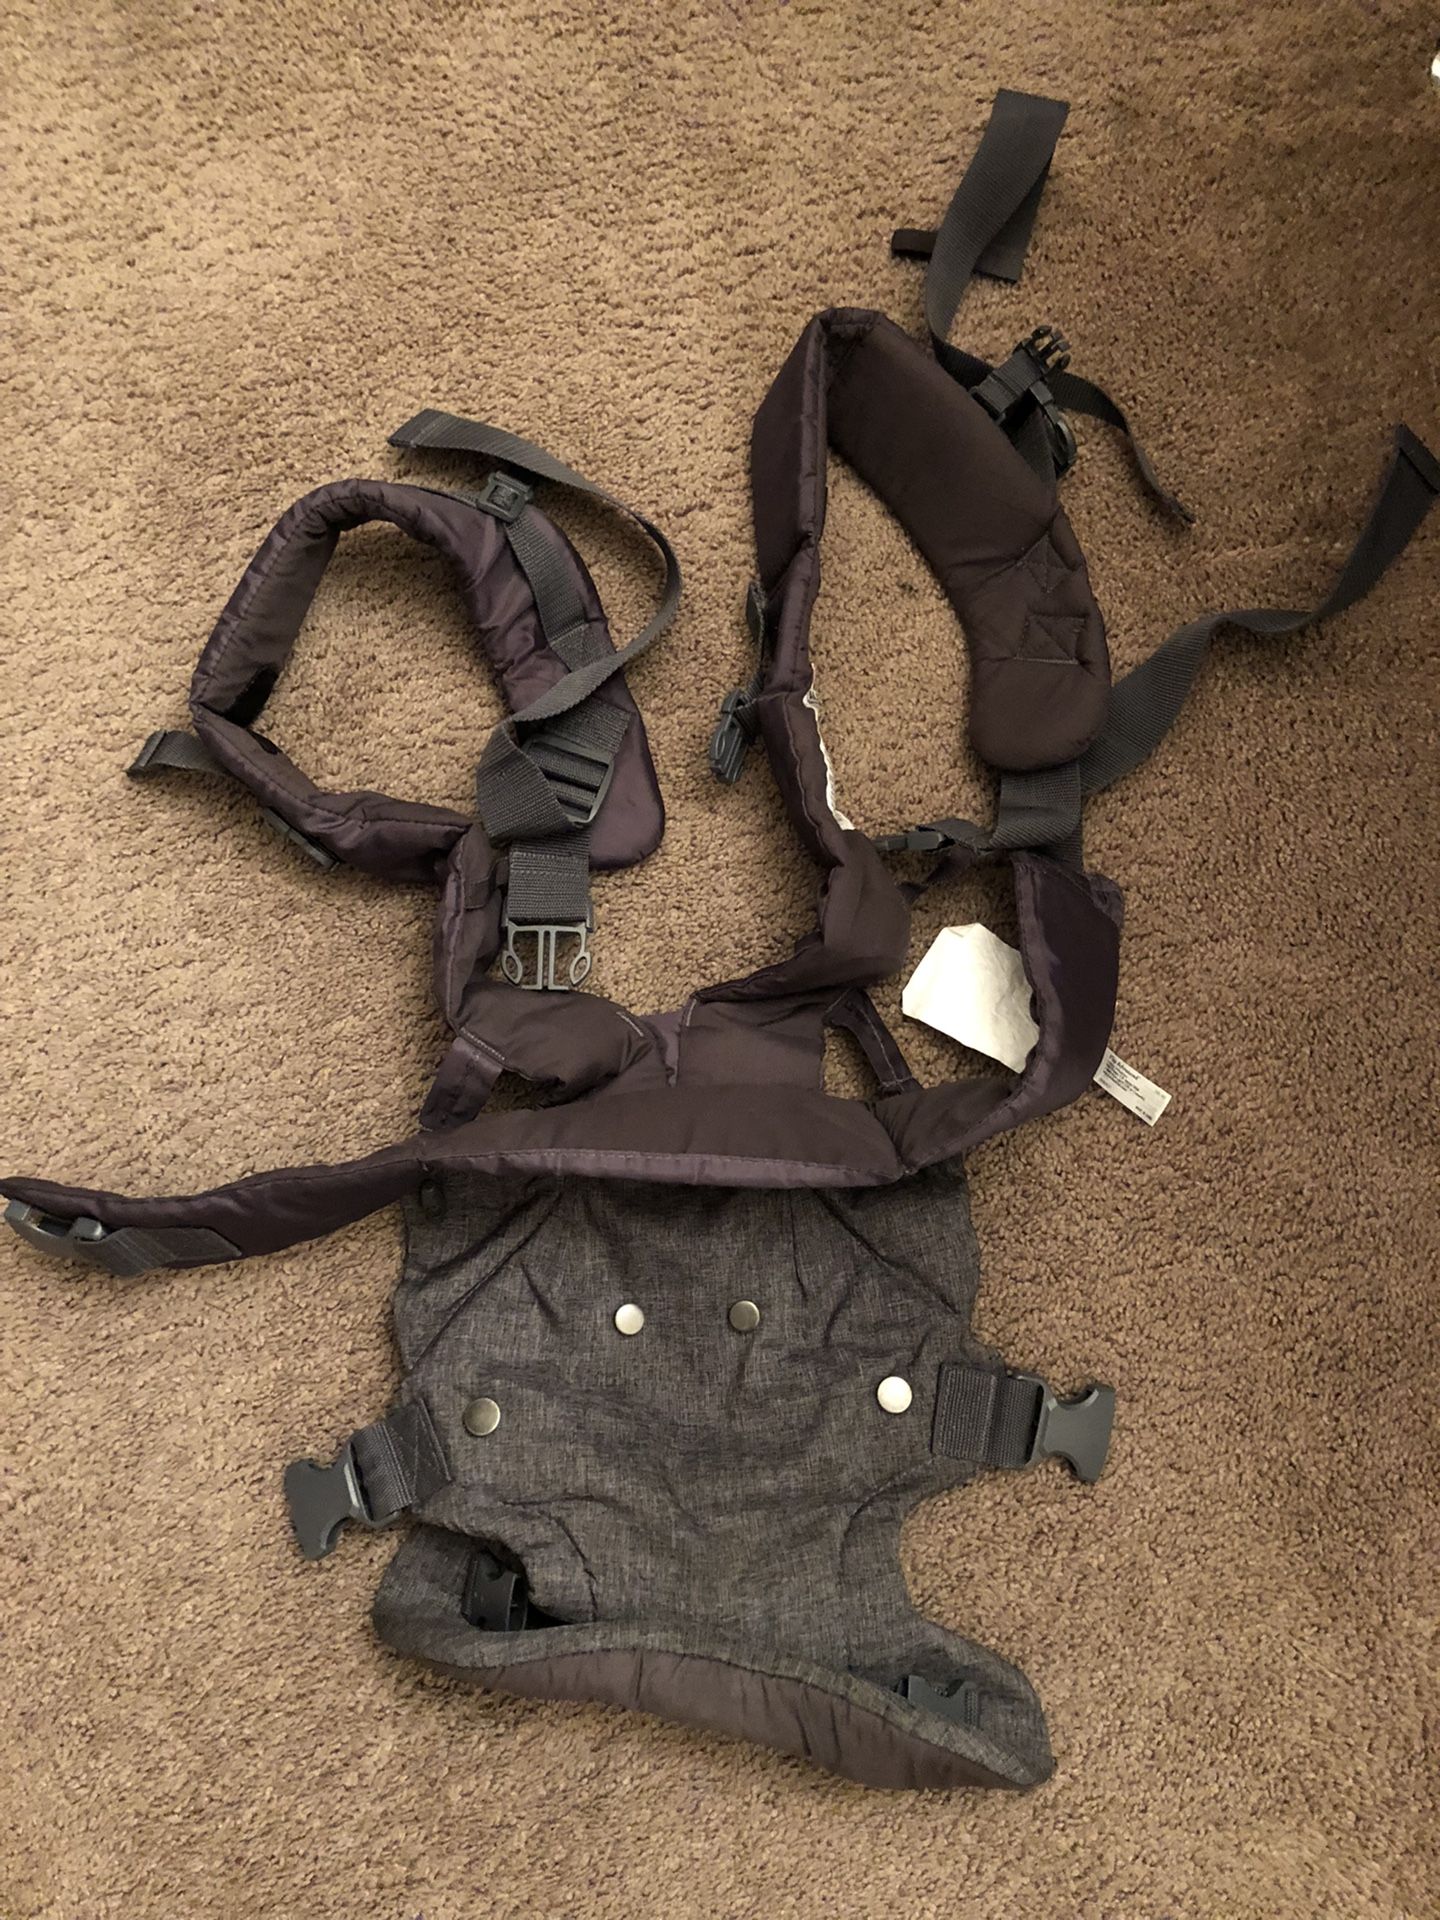 $10 Baby Carrier 